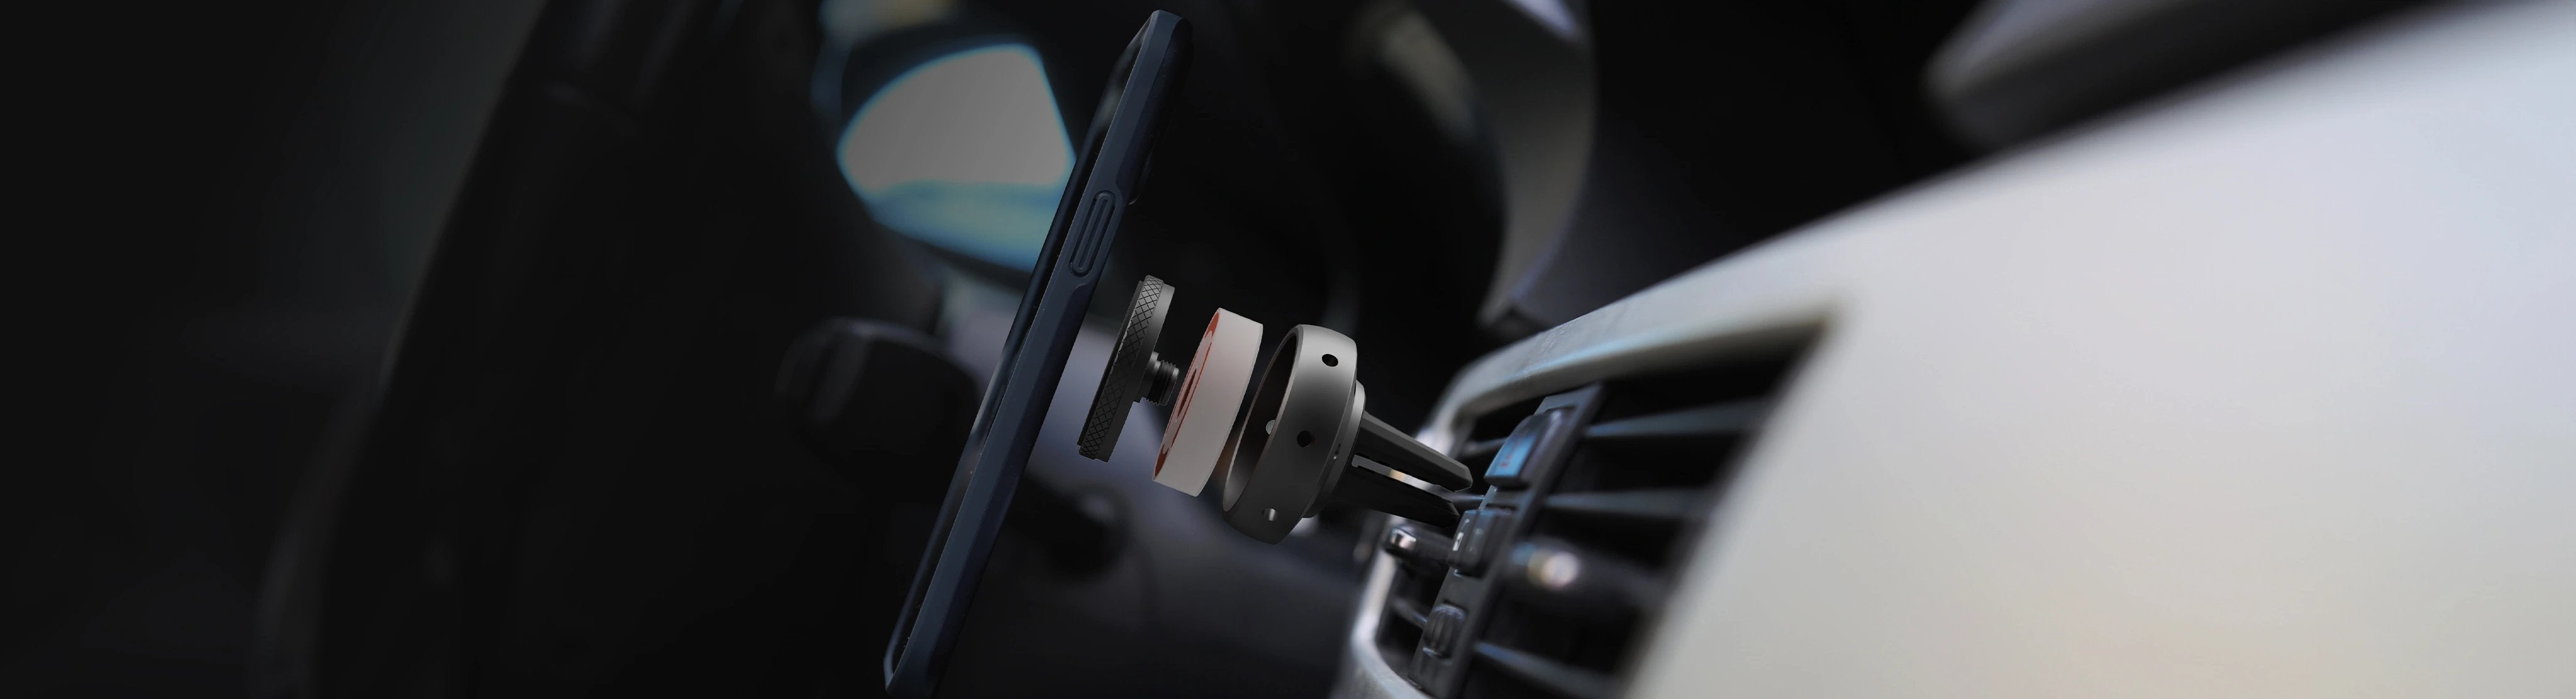 Smartphone secured on Tellur's innovative magnetic car holder with dual functionality as an AI-powered air freshener, providing a seamless blend of technology and comfort for drivers.